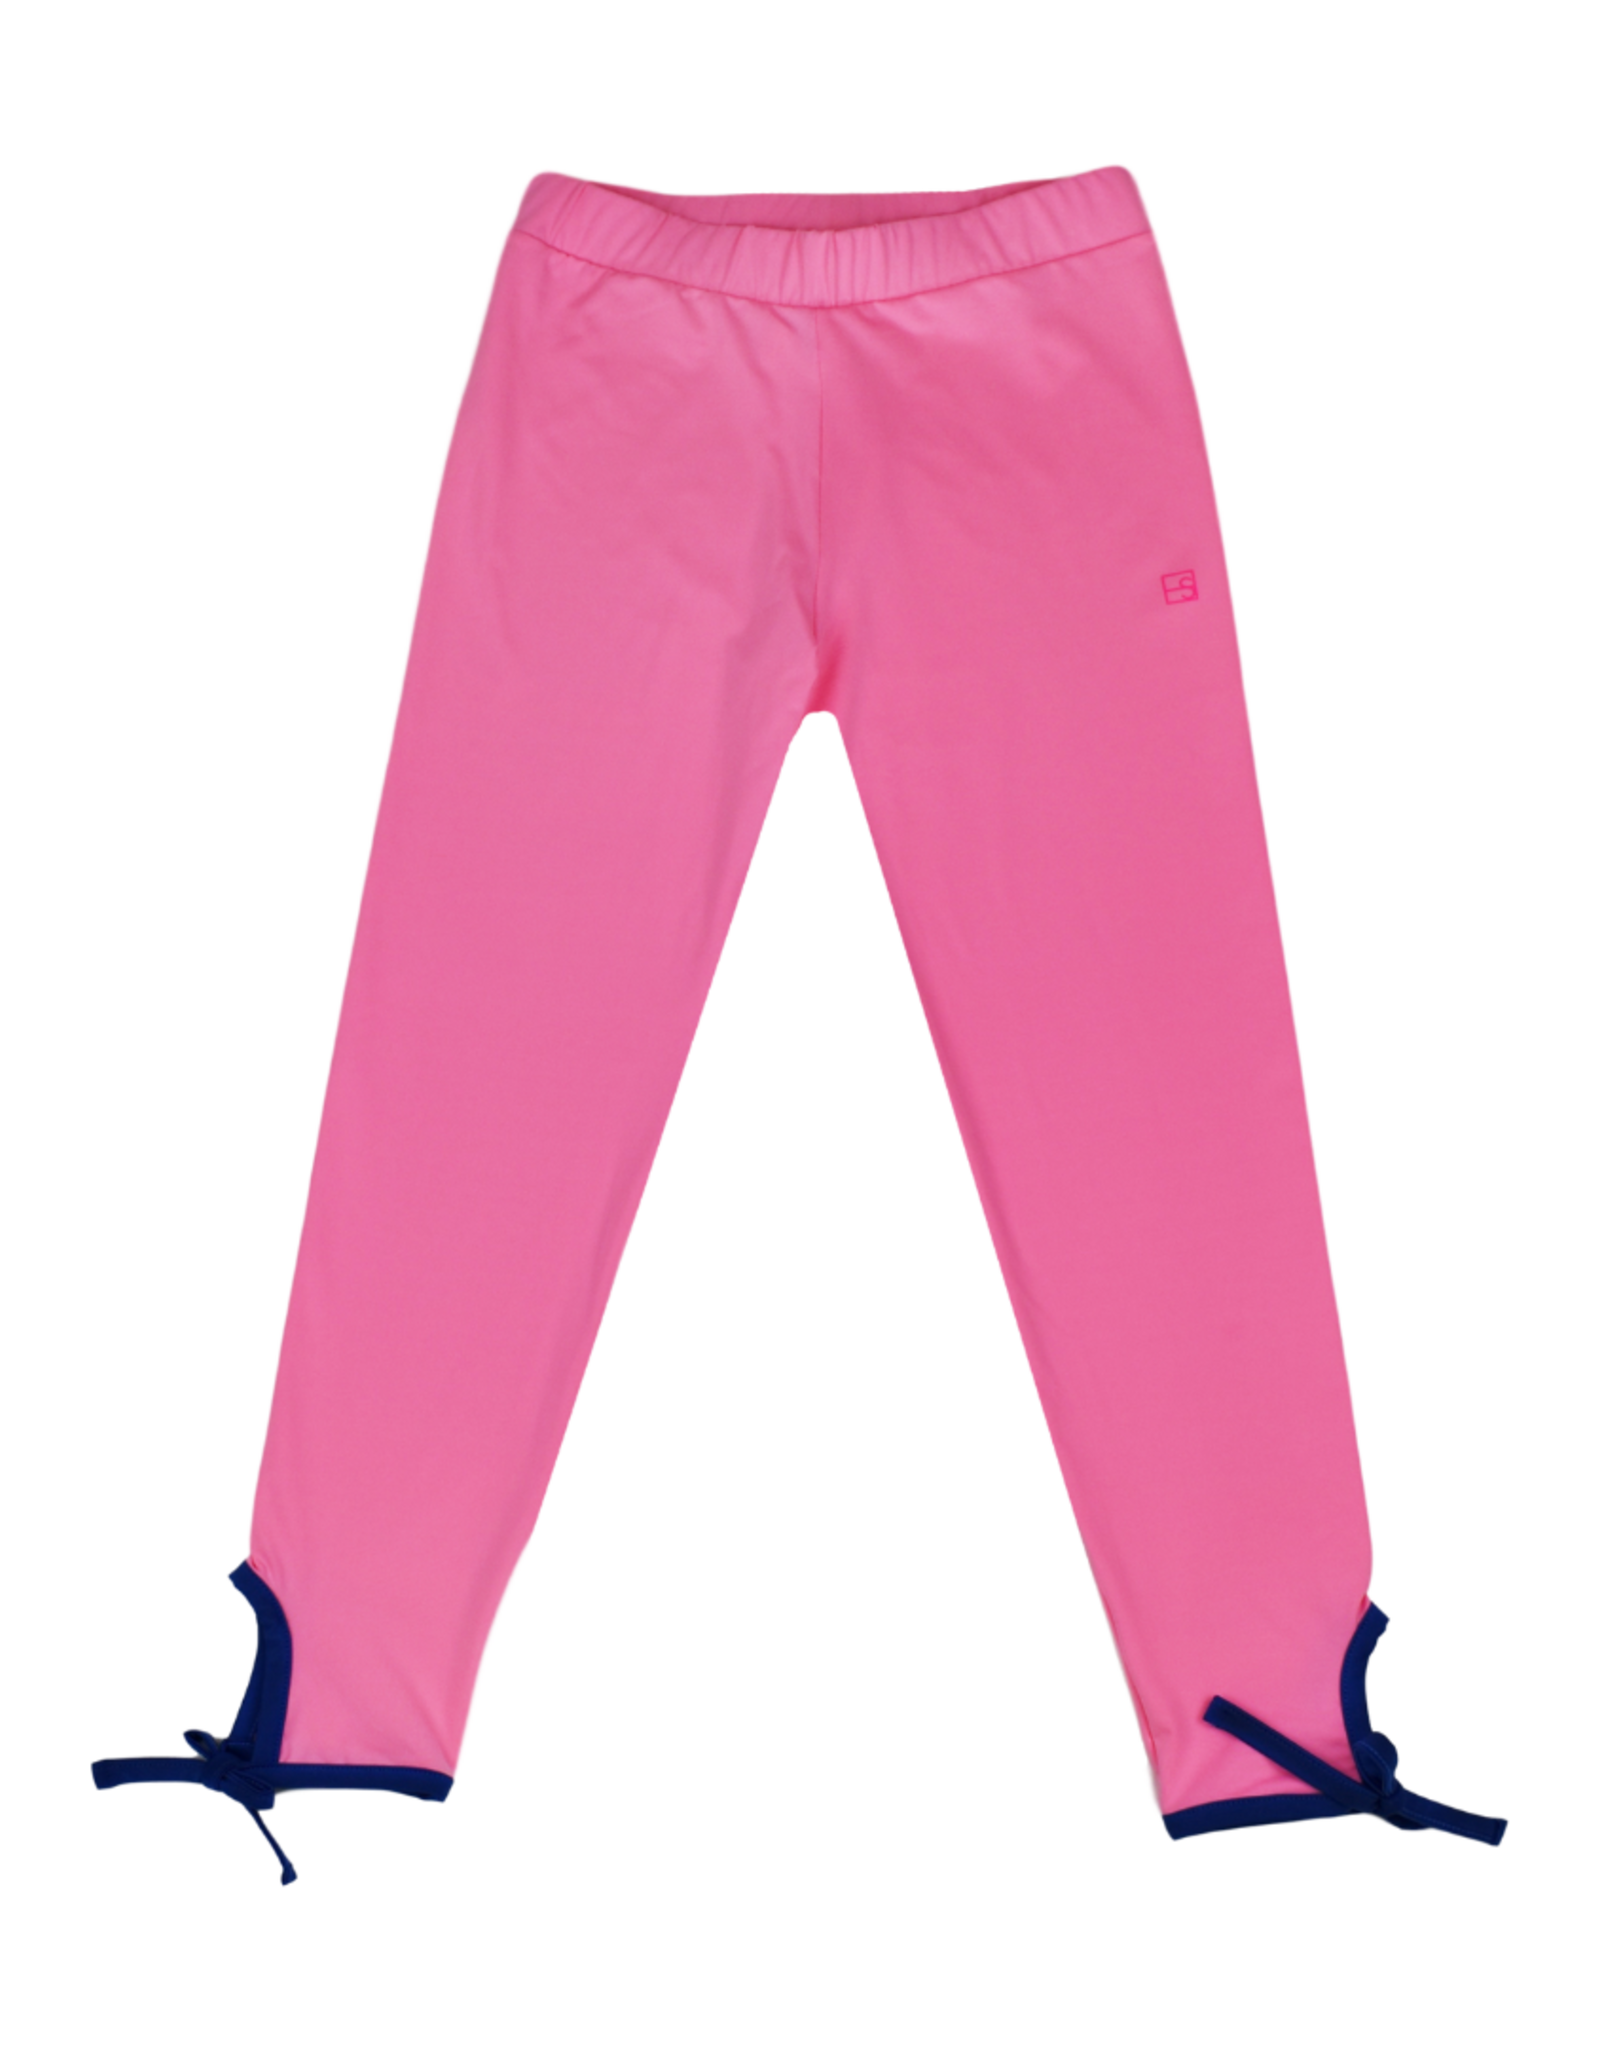 SET Avery Legging - Pink with Navy Ankle Ties